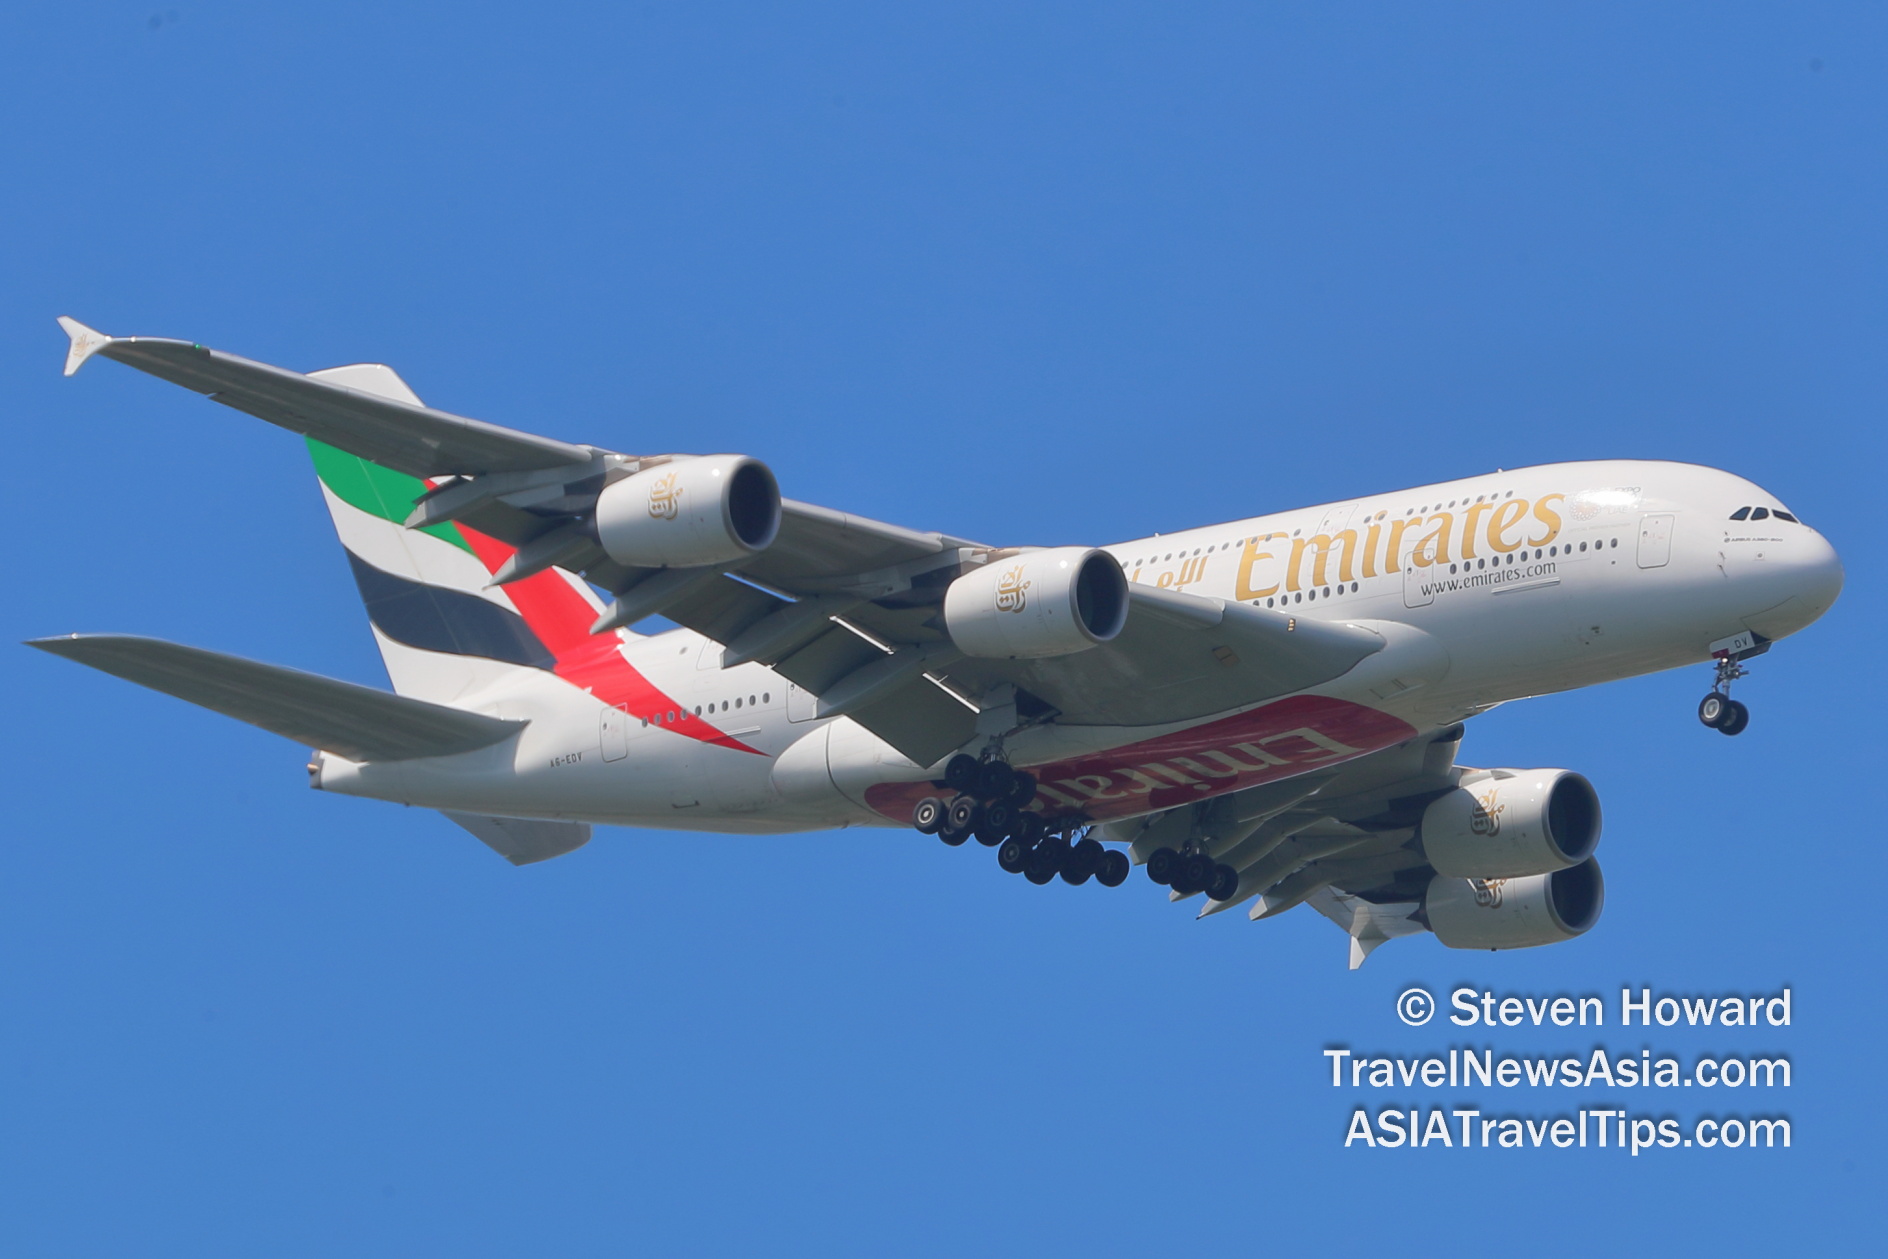 Emirates A380 reg: A6-EDV. Picture by Steven Howard of TravelNewsAsia.com Click to enlarge.